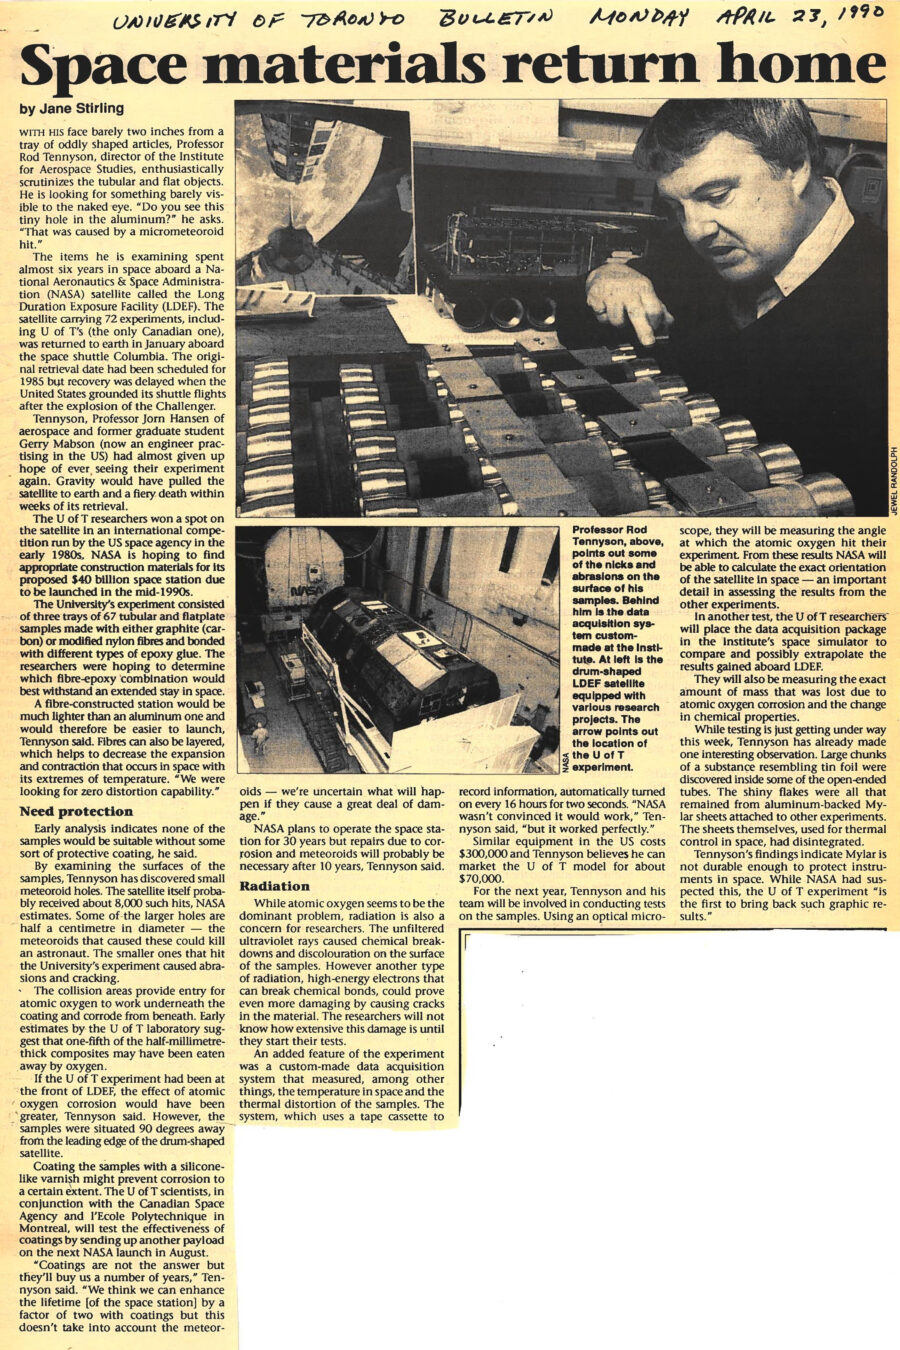 Newspaper clipping from University of Toronto Bulletin, April 23, 1990
Headline: Space materials return home
Byline: Jane Stirling
Photo 1: Professor Tennyson looks over an array of metal tubes mounted together.
Caption: Professor Rod Tennyson points out some of the nicks and abrasions on the surface of his samples. Behind him is the data acquisition system custom made at the Institute.
Photo 2: The drum-shaped cylinder of the LDEF satellite, secured in a NASA hangar.
Caption: At left is the drum-shaped LDEF satellite equipped with various research projects. The arrow points out the location of the U of T experiment.
With his face barely two inches from a tray of oddly shaped articles, Professor Rod Tennyson, director of the Institute for Aerospace Studies, enthusiastically scrutinizes the tubular and flat objects. He is looking for somethings barely visible to the naked eye. “Do you see this tiny hole in the aluminum?” he asks. “That was caused by a micrometeoroid hit.”
The items he is examining spent almost six years in space aboard a National Aeronautics & Space Administration (NASA) satellite called the Long Duration Exposure Facility (LDEF). The satellite carrying 72 experiments, including the University of Toronto’s (the only Canadian one), was returned to earth in January aboard the space shuttle Columbia. The original retrieval date had been scheduled for 1985 but recovery was delayed when the United States grounded its shuttle flights after the explosion of the Challenger.
Tennyson, Professor Jorn Hansen of Aerospace and former graduate student Gerry Mabson (now an engineer practising in the United States) had almost given up hope of ever seeing their experiment again. Gravity would have pulled the satellite to earth and fiery death within weeks of its retrieval.
The university researchers won a spot on the satellite in an international competition run by the United States space agency in the early 1980s. NASA is hoping to find appropriate construction materials for its proposed $40 billion space station due to be launched in the mid-1990s.
The University’s experiment consisted of three trays of 67 tubular and flatplate samples made with either graphite (carbon) or modified nylon fibres and bonded with different types of epoxy glue. The researchers were hoping to determine which fibre-epoxy combination would best withstand an extended stay in space.
A fibre-constructed station would be much lighter than an aluminum one and would therefore be easier to launch, Tennyson said. Fibres can also be layered, which helps to decrease the expansion and contraction that occurs in space with its extremes of temperature. “We were looking for zero distortion capability.”
Early analysis indicates none of the samples would be suitable without some sort of protective coating, he said. By examining the surfaces of the samples, Tennyson has discovered small meteoroid holes. The satellite itself probably received about 8,000 such hits, NASA estimates. Some of the larger holes are half a centimetre in diameter – the meteoroids that caused these could kill an astronaut. The smaller ones that hit the University’s experiment caused abrasions and cracking.
The collision areas provide entry for atomic oxygen to work underneath the coating and corrode from beneath. Early estimates by the University of Toronto laboratory suggest that one-fifth of the half-millimetre-thick composites may have been eaten away by oxygen. If the University of Toronto experiment had been at the front of LDEF, the effect of atomic corrosion would have been greater, Tennyson said. However, the samples were situated 90 degrees away from the leading edge of the drum-shaped satellite.
Coating the samples with a silicone-like varnish might prevent corrosion to a certain extent. The University of Toronto scientists, in conjunction with the Canadian Space Agency and l’Ecole Polytechnique in Montreal, will test the effectiveness of coatings by sending up another payload on the next NASA launch in August.
“Coatings are not the answer but they’ll buy us a number of years,” Tennyson said. “We think we can enhance the lifetime [of the space station] by a factor of two with coatings but this does not take into account the meteoroids – we are uncertain what will happen if they cause a great deal of damage.”
NASA plans to operate the space station for thirty years but repairs due to corrosion and meteroids will probably be necessary after ten years, Tennyson said.
While atomic oxygen seems to be the dominant problem, radiation is also a concern for researchers. The unfiltered ultraviolet rays caused chemical breakdowns and discolouration on the surface of the samples. However another type of radiation, high-energy electrons that can break chemical bonds, could prove even more damaging by causing cracks in the material. The researchers will not know how extensive this damage is until they start their tests.
An added feature of the experiment was a custom-made data acquisition system that measured, among other things, the temperature in space and the thermal distortion of the samples. The system, which uses a tape cassette to record information, automatically turned on every sixteen hours for two seconds. “NASA was not convinced it would work,” Tennyson said, “but it worked perfectly.” Similar equipment in the United States costs $300,000 and Tennyson believes he can market the University of Toronto model for about $70,000.
For the next year, Tennyson and his team will be involved in conducting tests on the samples. Using an optical microscope, they will be measuring the angle at which the atomic oxygen hit their experiment. From these results NASA will be able to calculate the exact orientation of the satellite in space – an important detail in assessing the results from the other experiments.
In another test, the University of Toronto researchers will place the data acquisition package in the institute’s space simulator to compare and possibly extrapolate the results gained aboard the LDEF. They will also be measuring the exact amount of mass that was lost due to atomic oxygen corrosion and the change in chemical properties.
While testing is just getting under way this week, Tennyson has already made one interesting observation. Large chunks of a substance resembling tin foil were discovered inside some of the open-ended tubes. The shiny flakes were all that remained from aluminum-backed Mylar sheets attached to other experiments. The sheets themselves, used for thermal control in space, had disintegrated.
Tennyson’s findings indicate that Mylar is not durable enough to protect instruments in space. While NASA had suspected this, the University of Toronto experiment “is the first to bring back such graphic results.”